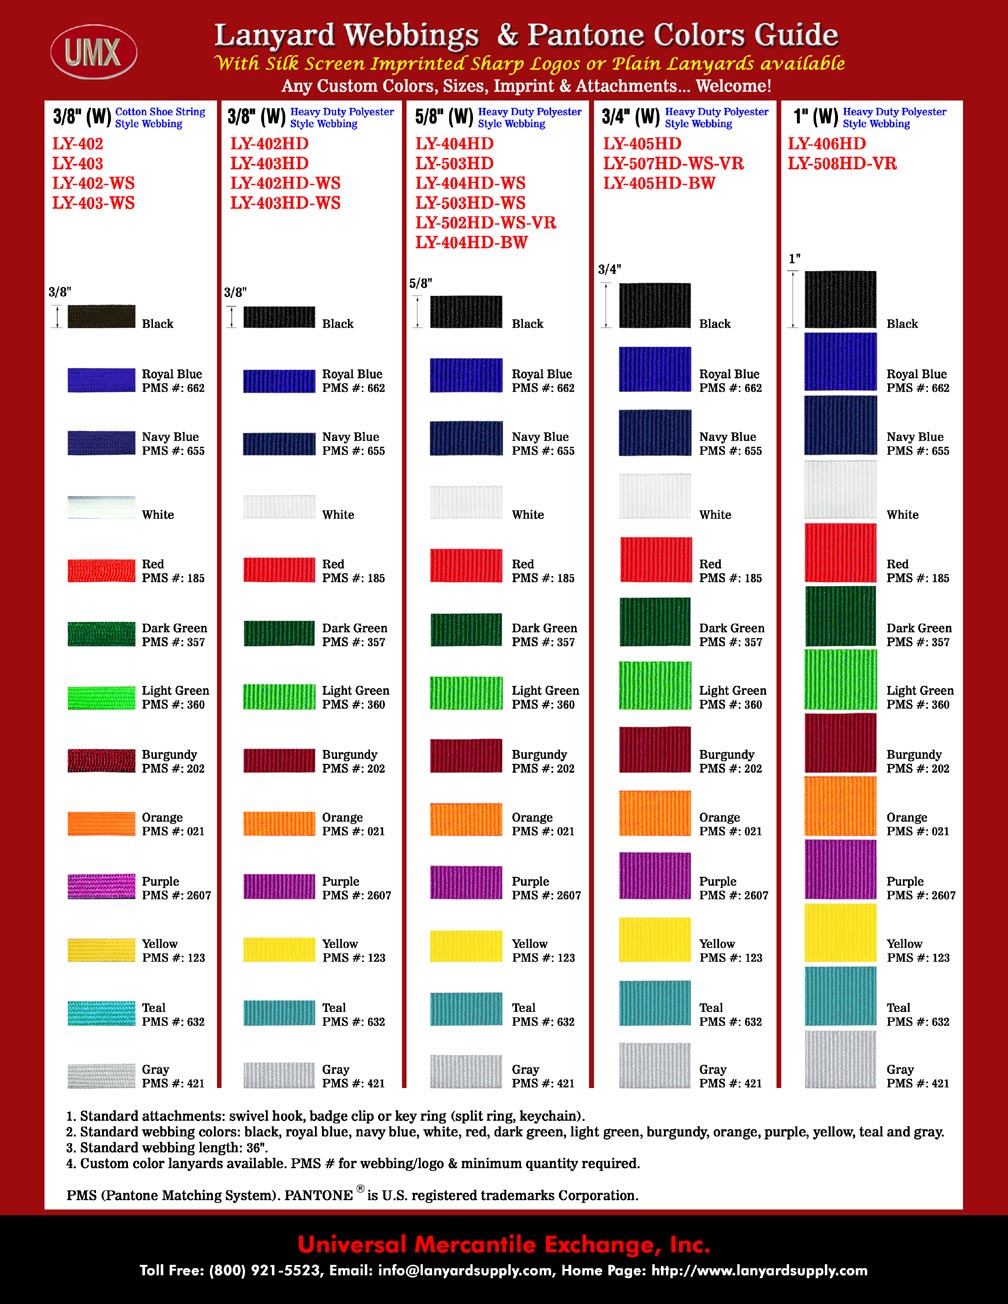 Lanyard Webbing PMS Color ( Pantone Matching System ) - Color Webbings Reference Guide